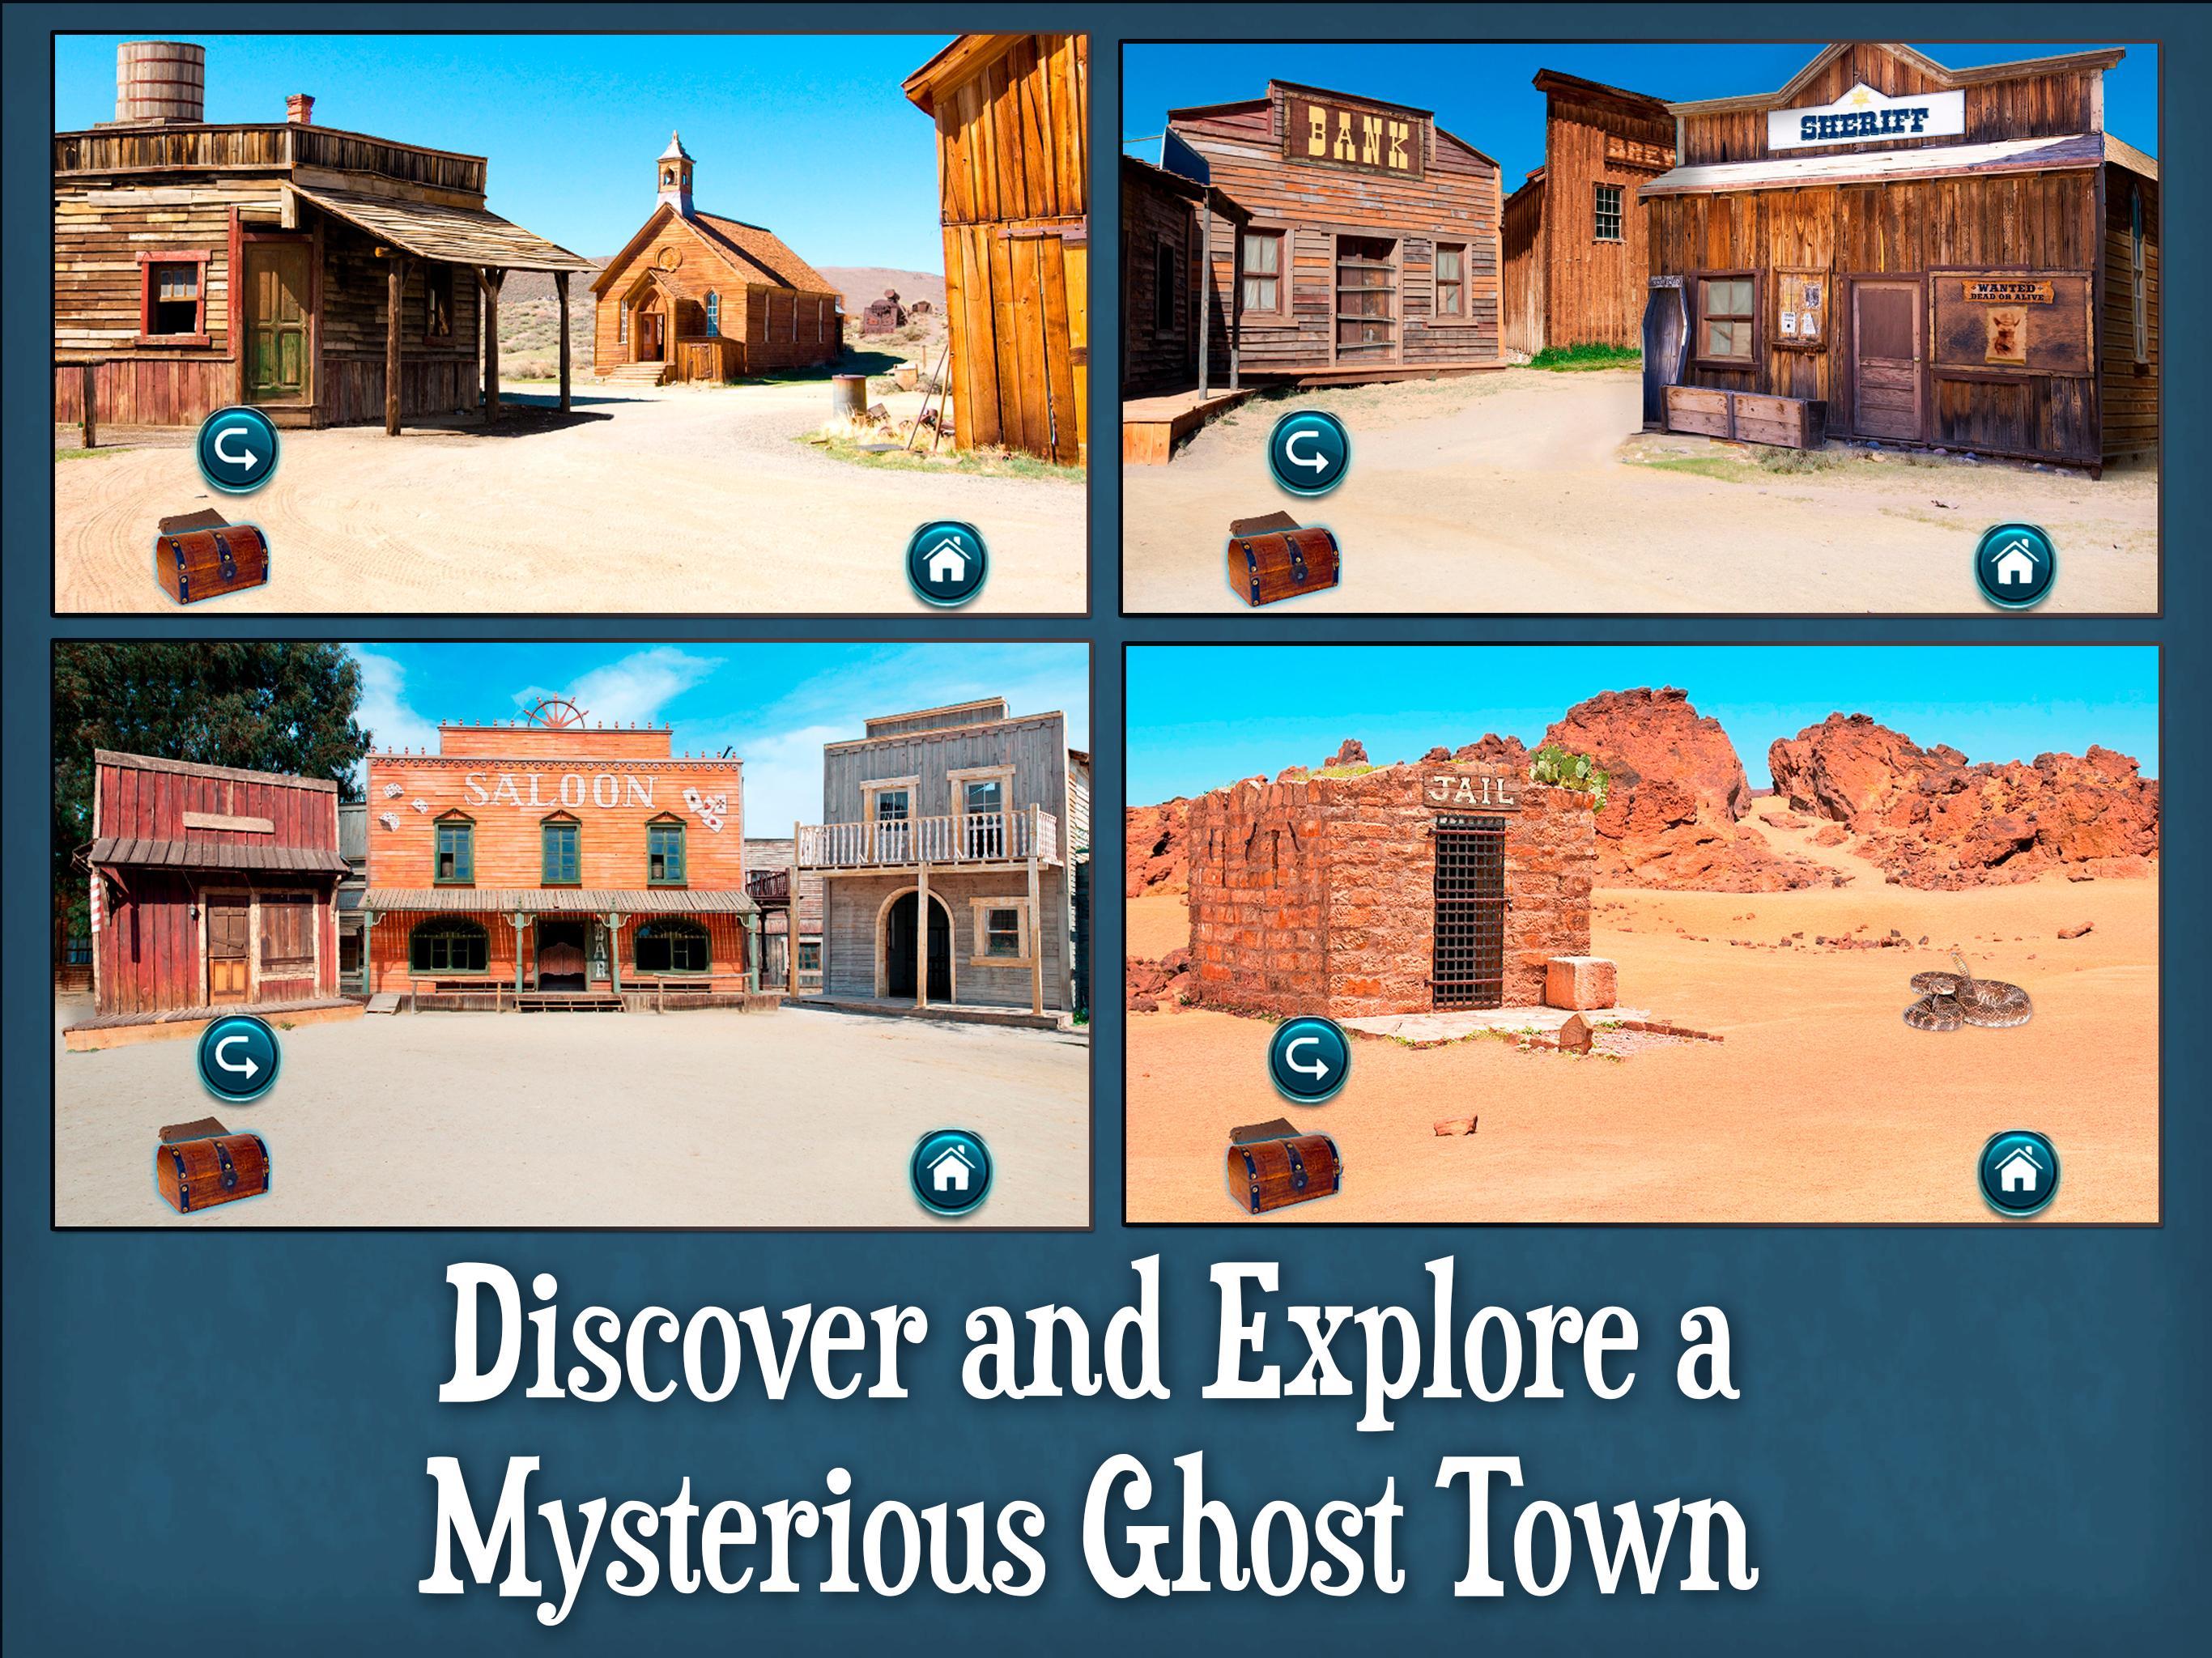 Screenshot of The Ghost Town